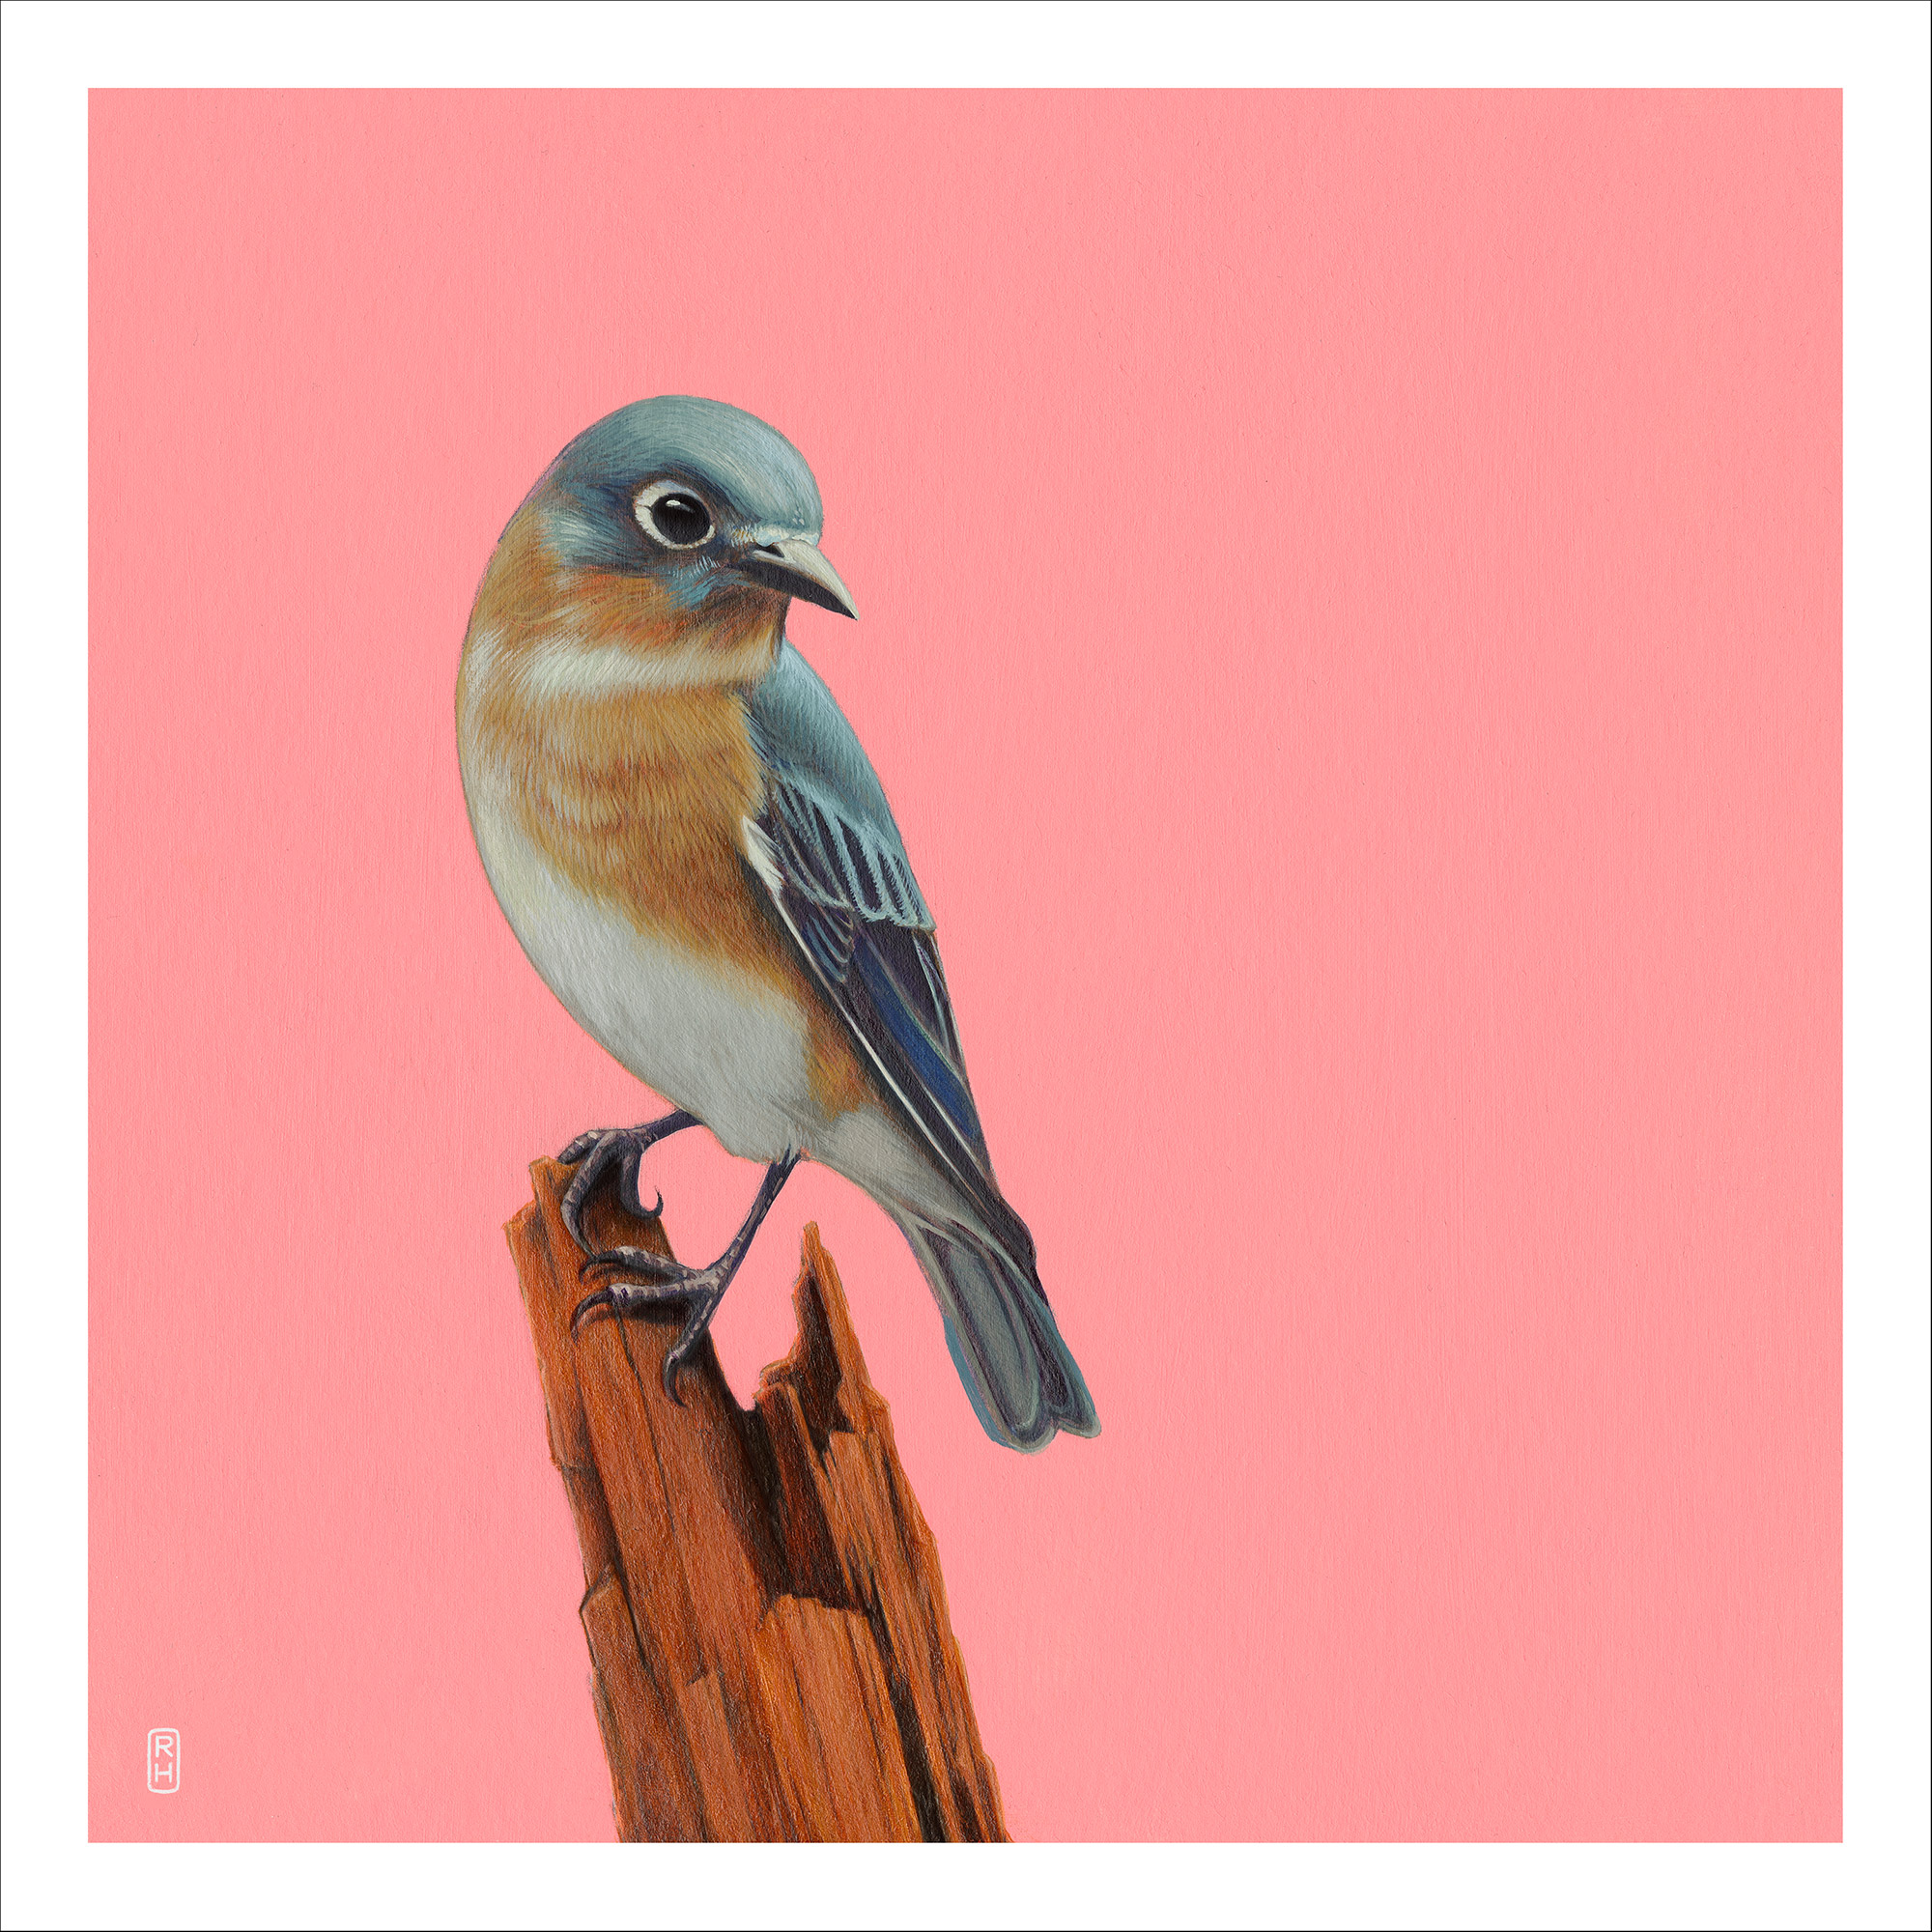 Painting of a bluebird